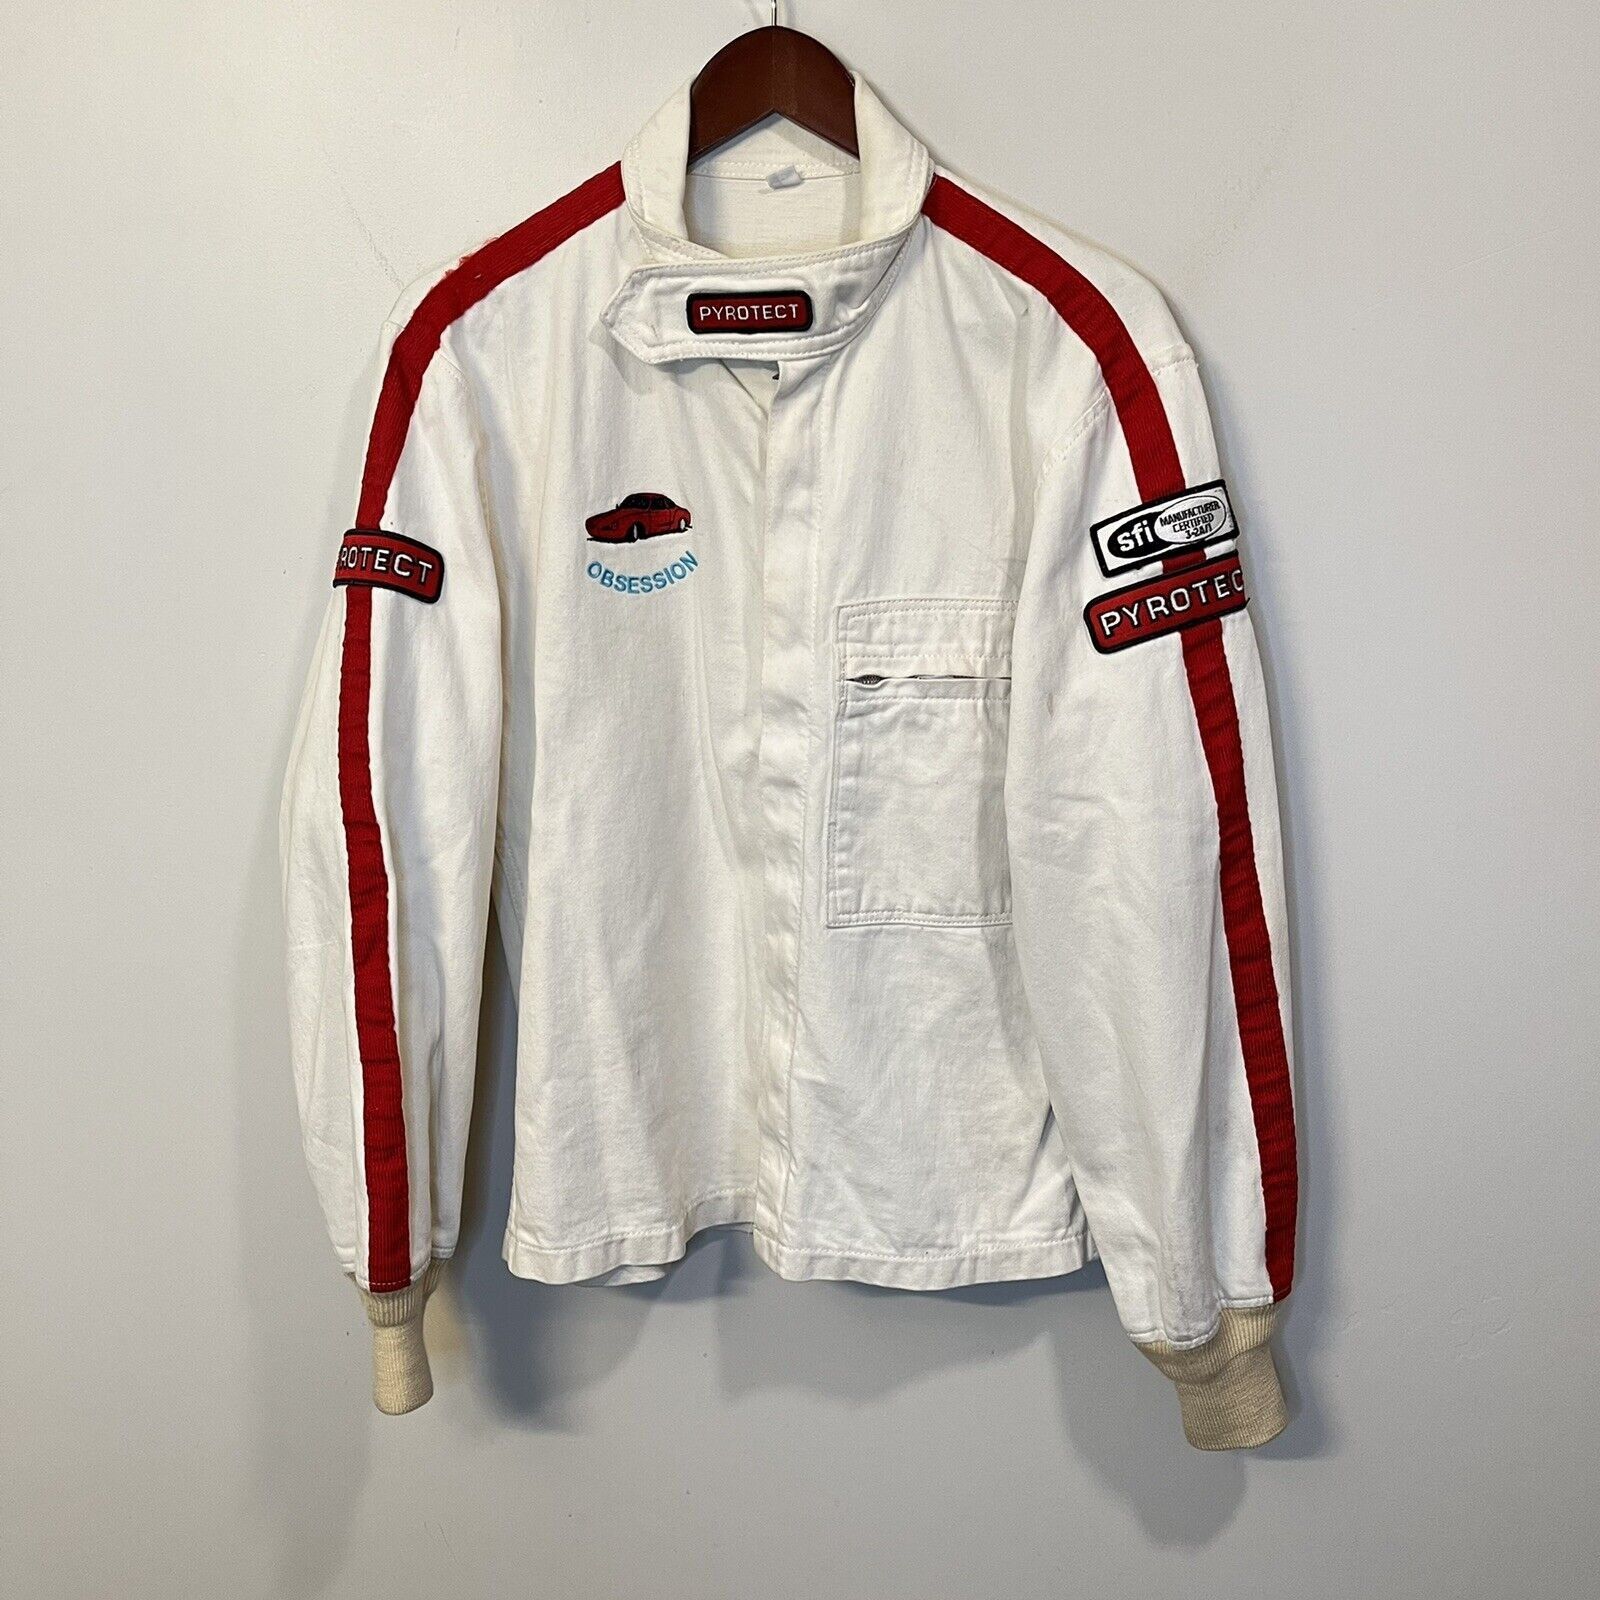 Vintage Vintage Pyrotect Professional racing FIre jacket White Race ...